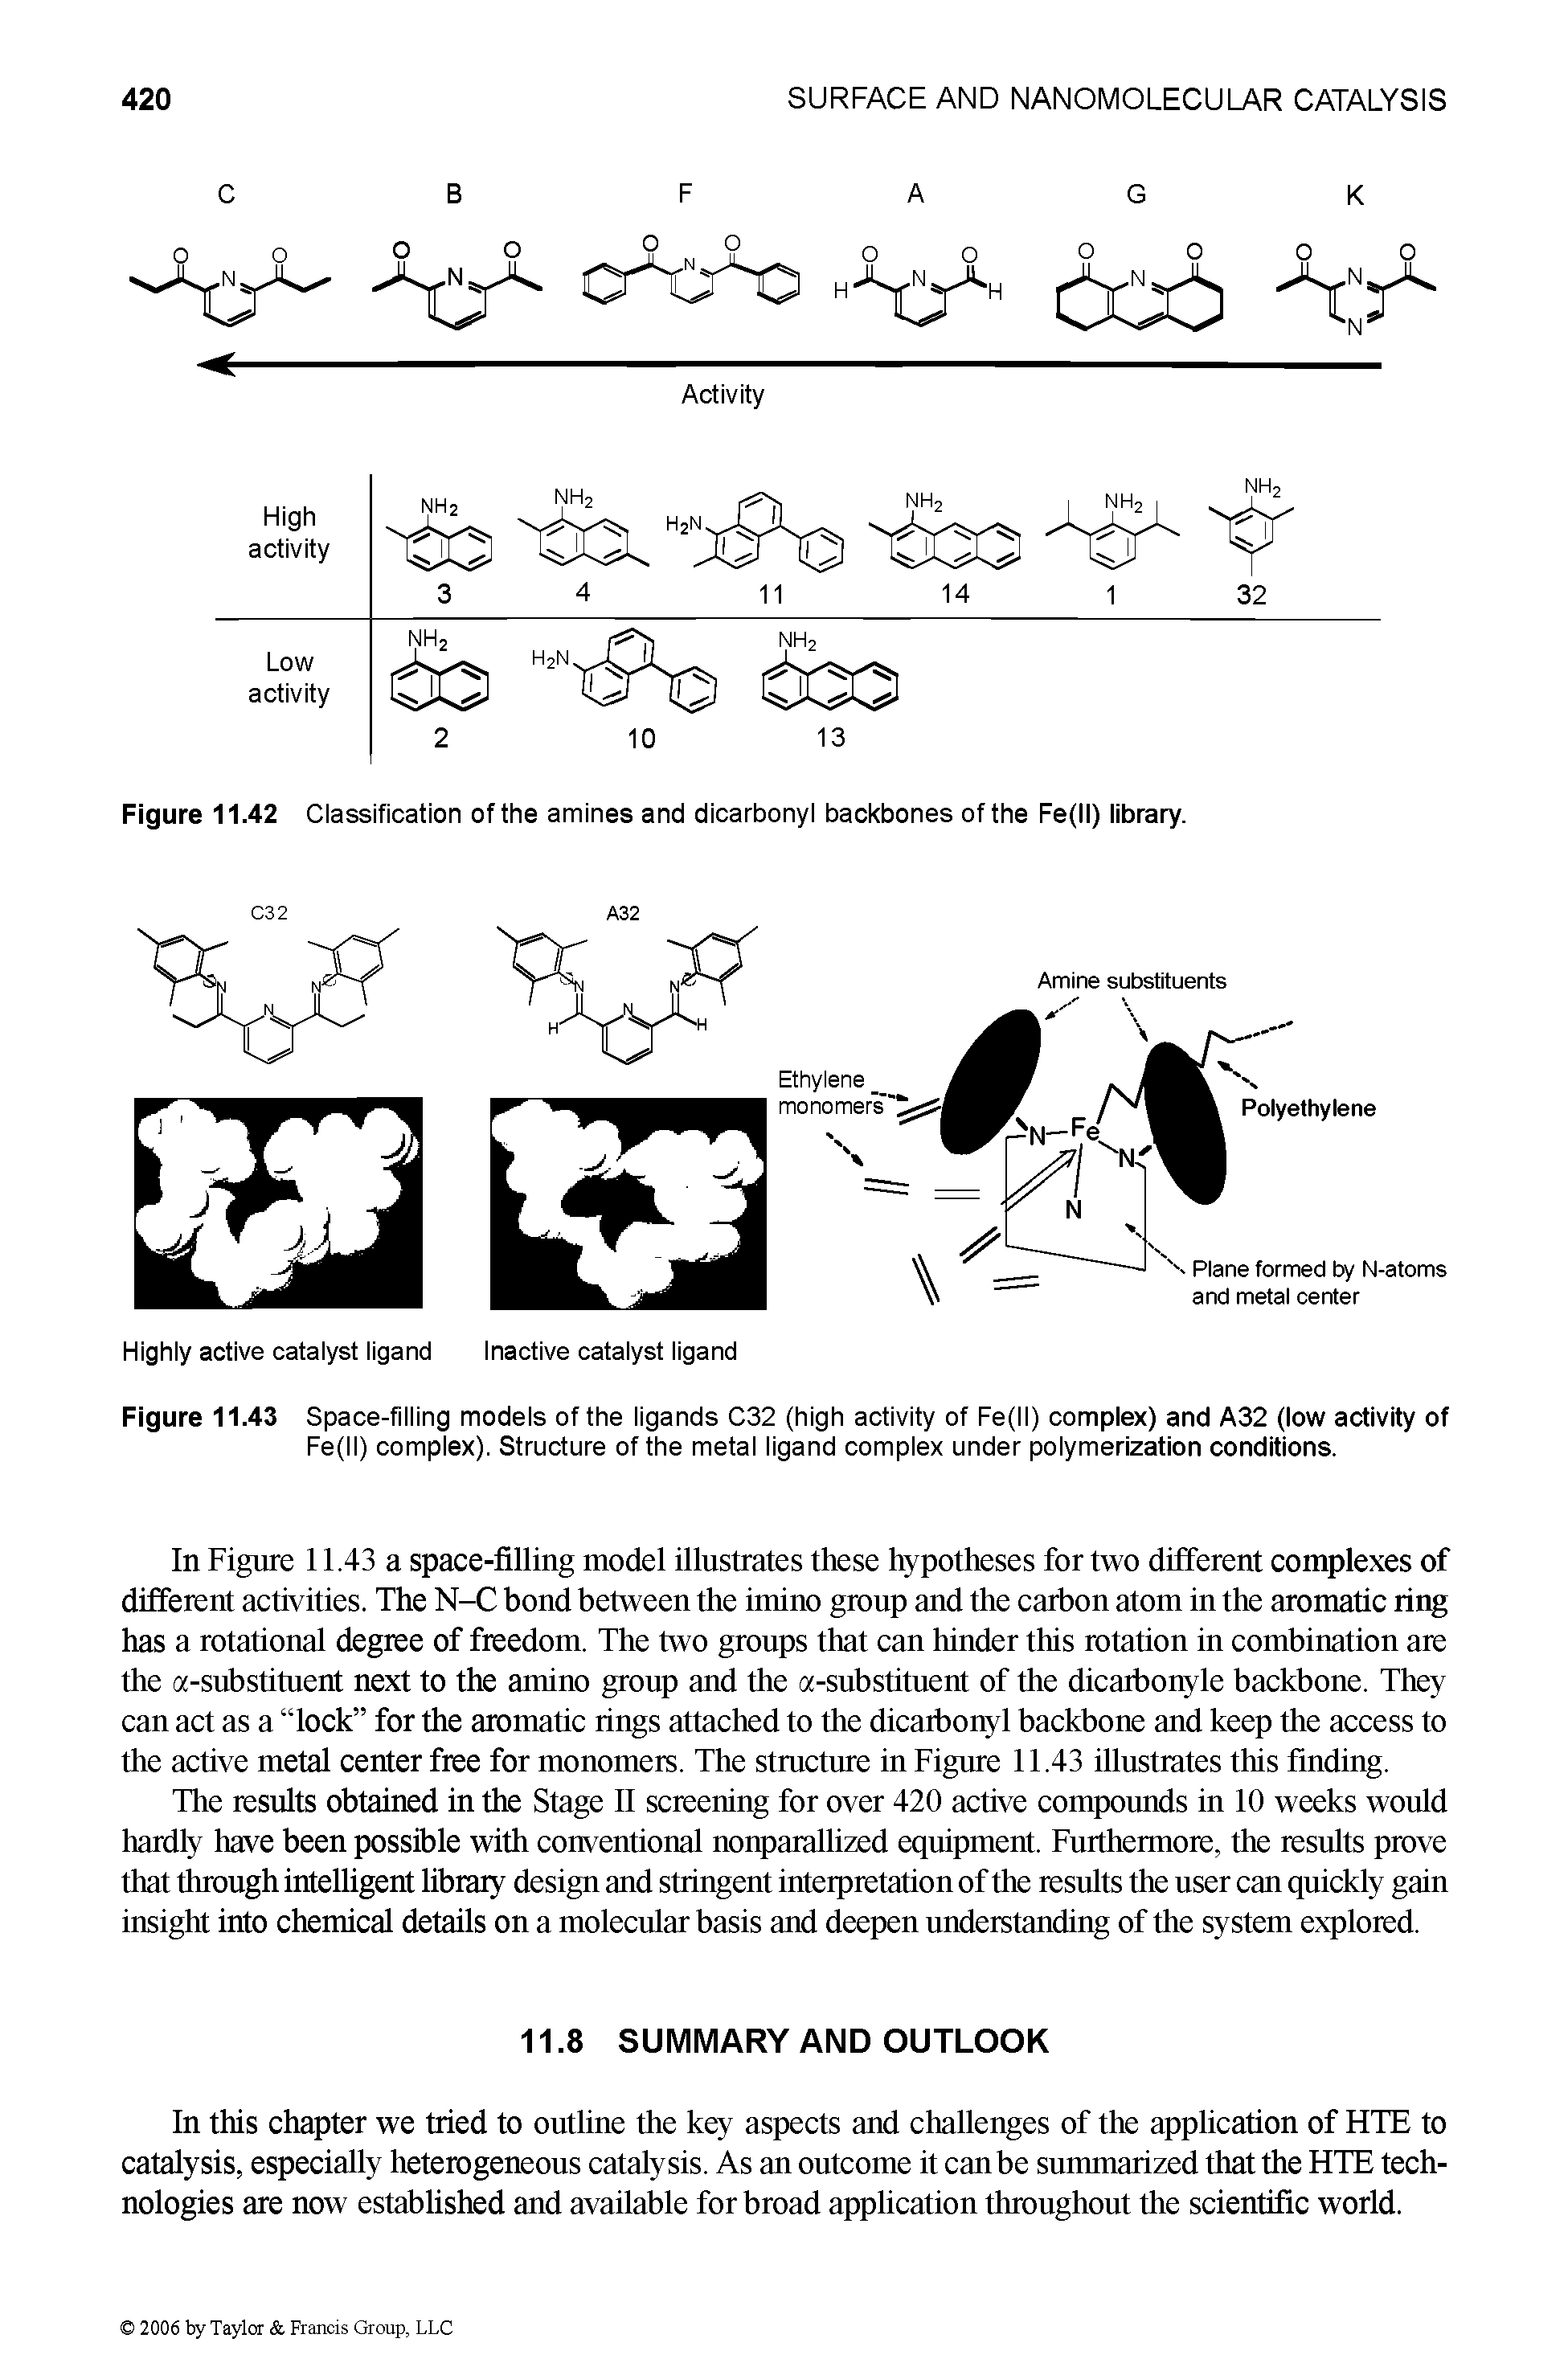 Figure 11.42 Classification of the amines and dicarbonyl backbones of the Fe(ll) library.